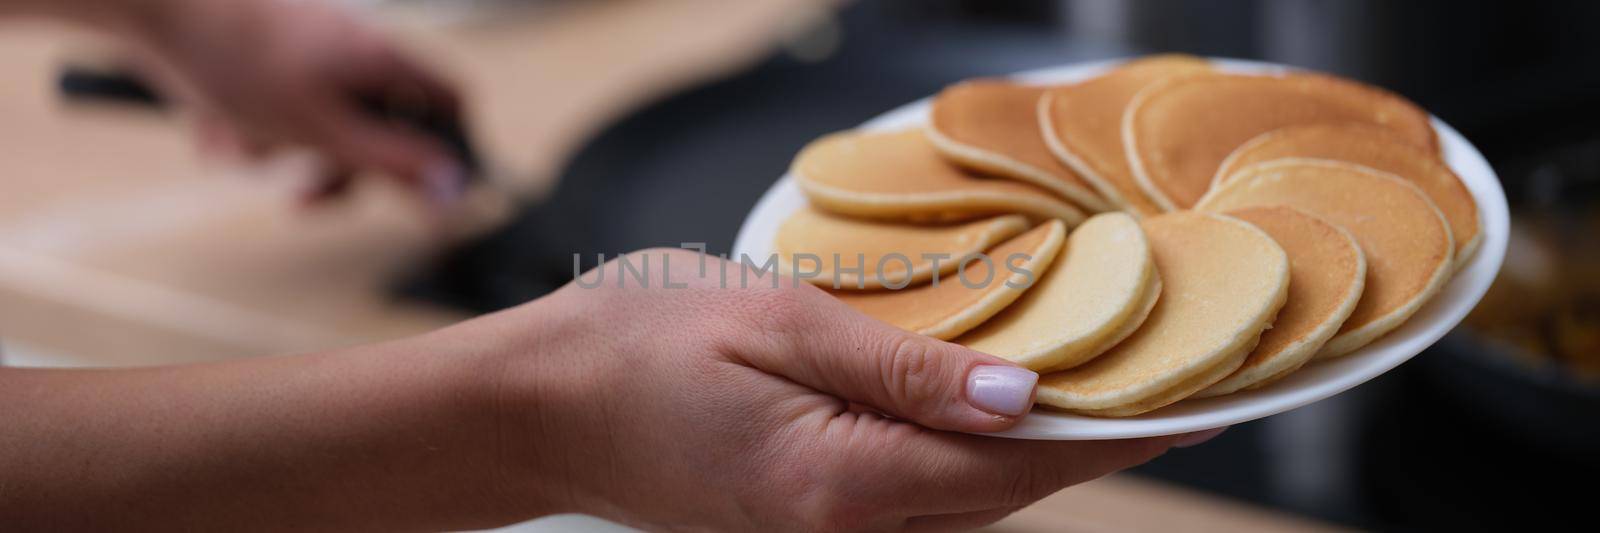 Woman holding plate of pancakes near stove in kitchen closeup. Rustic cuisine concept